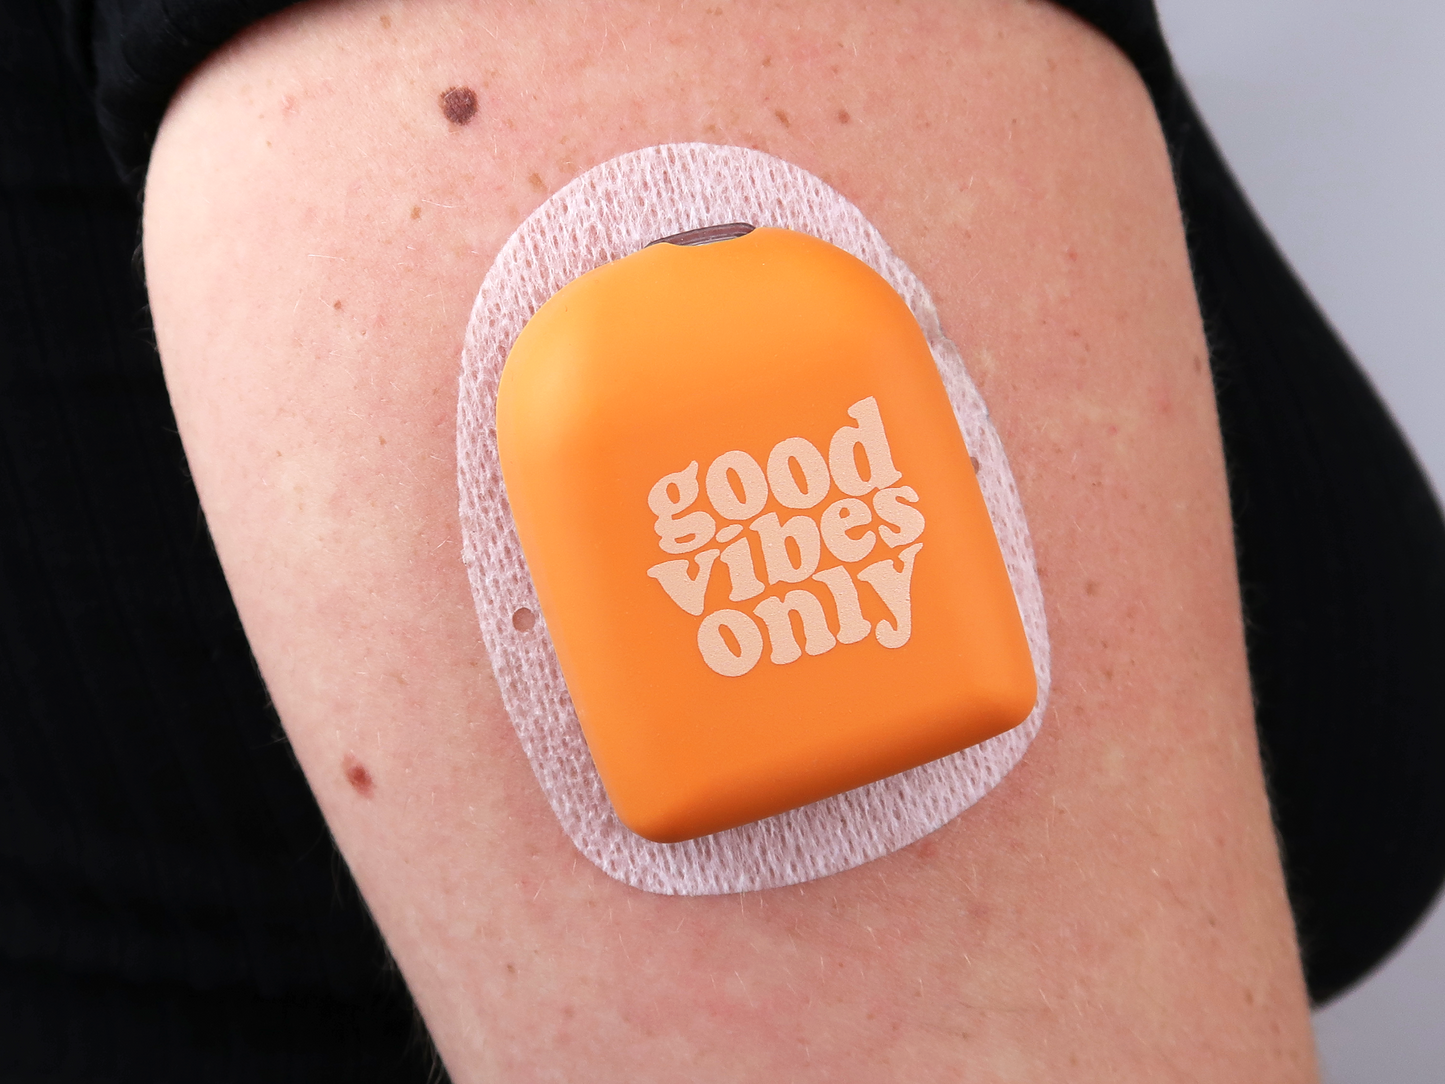 Omnipod Cover - Print - Good Vibes Only Orange